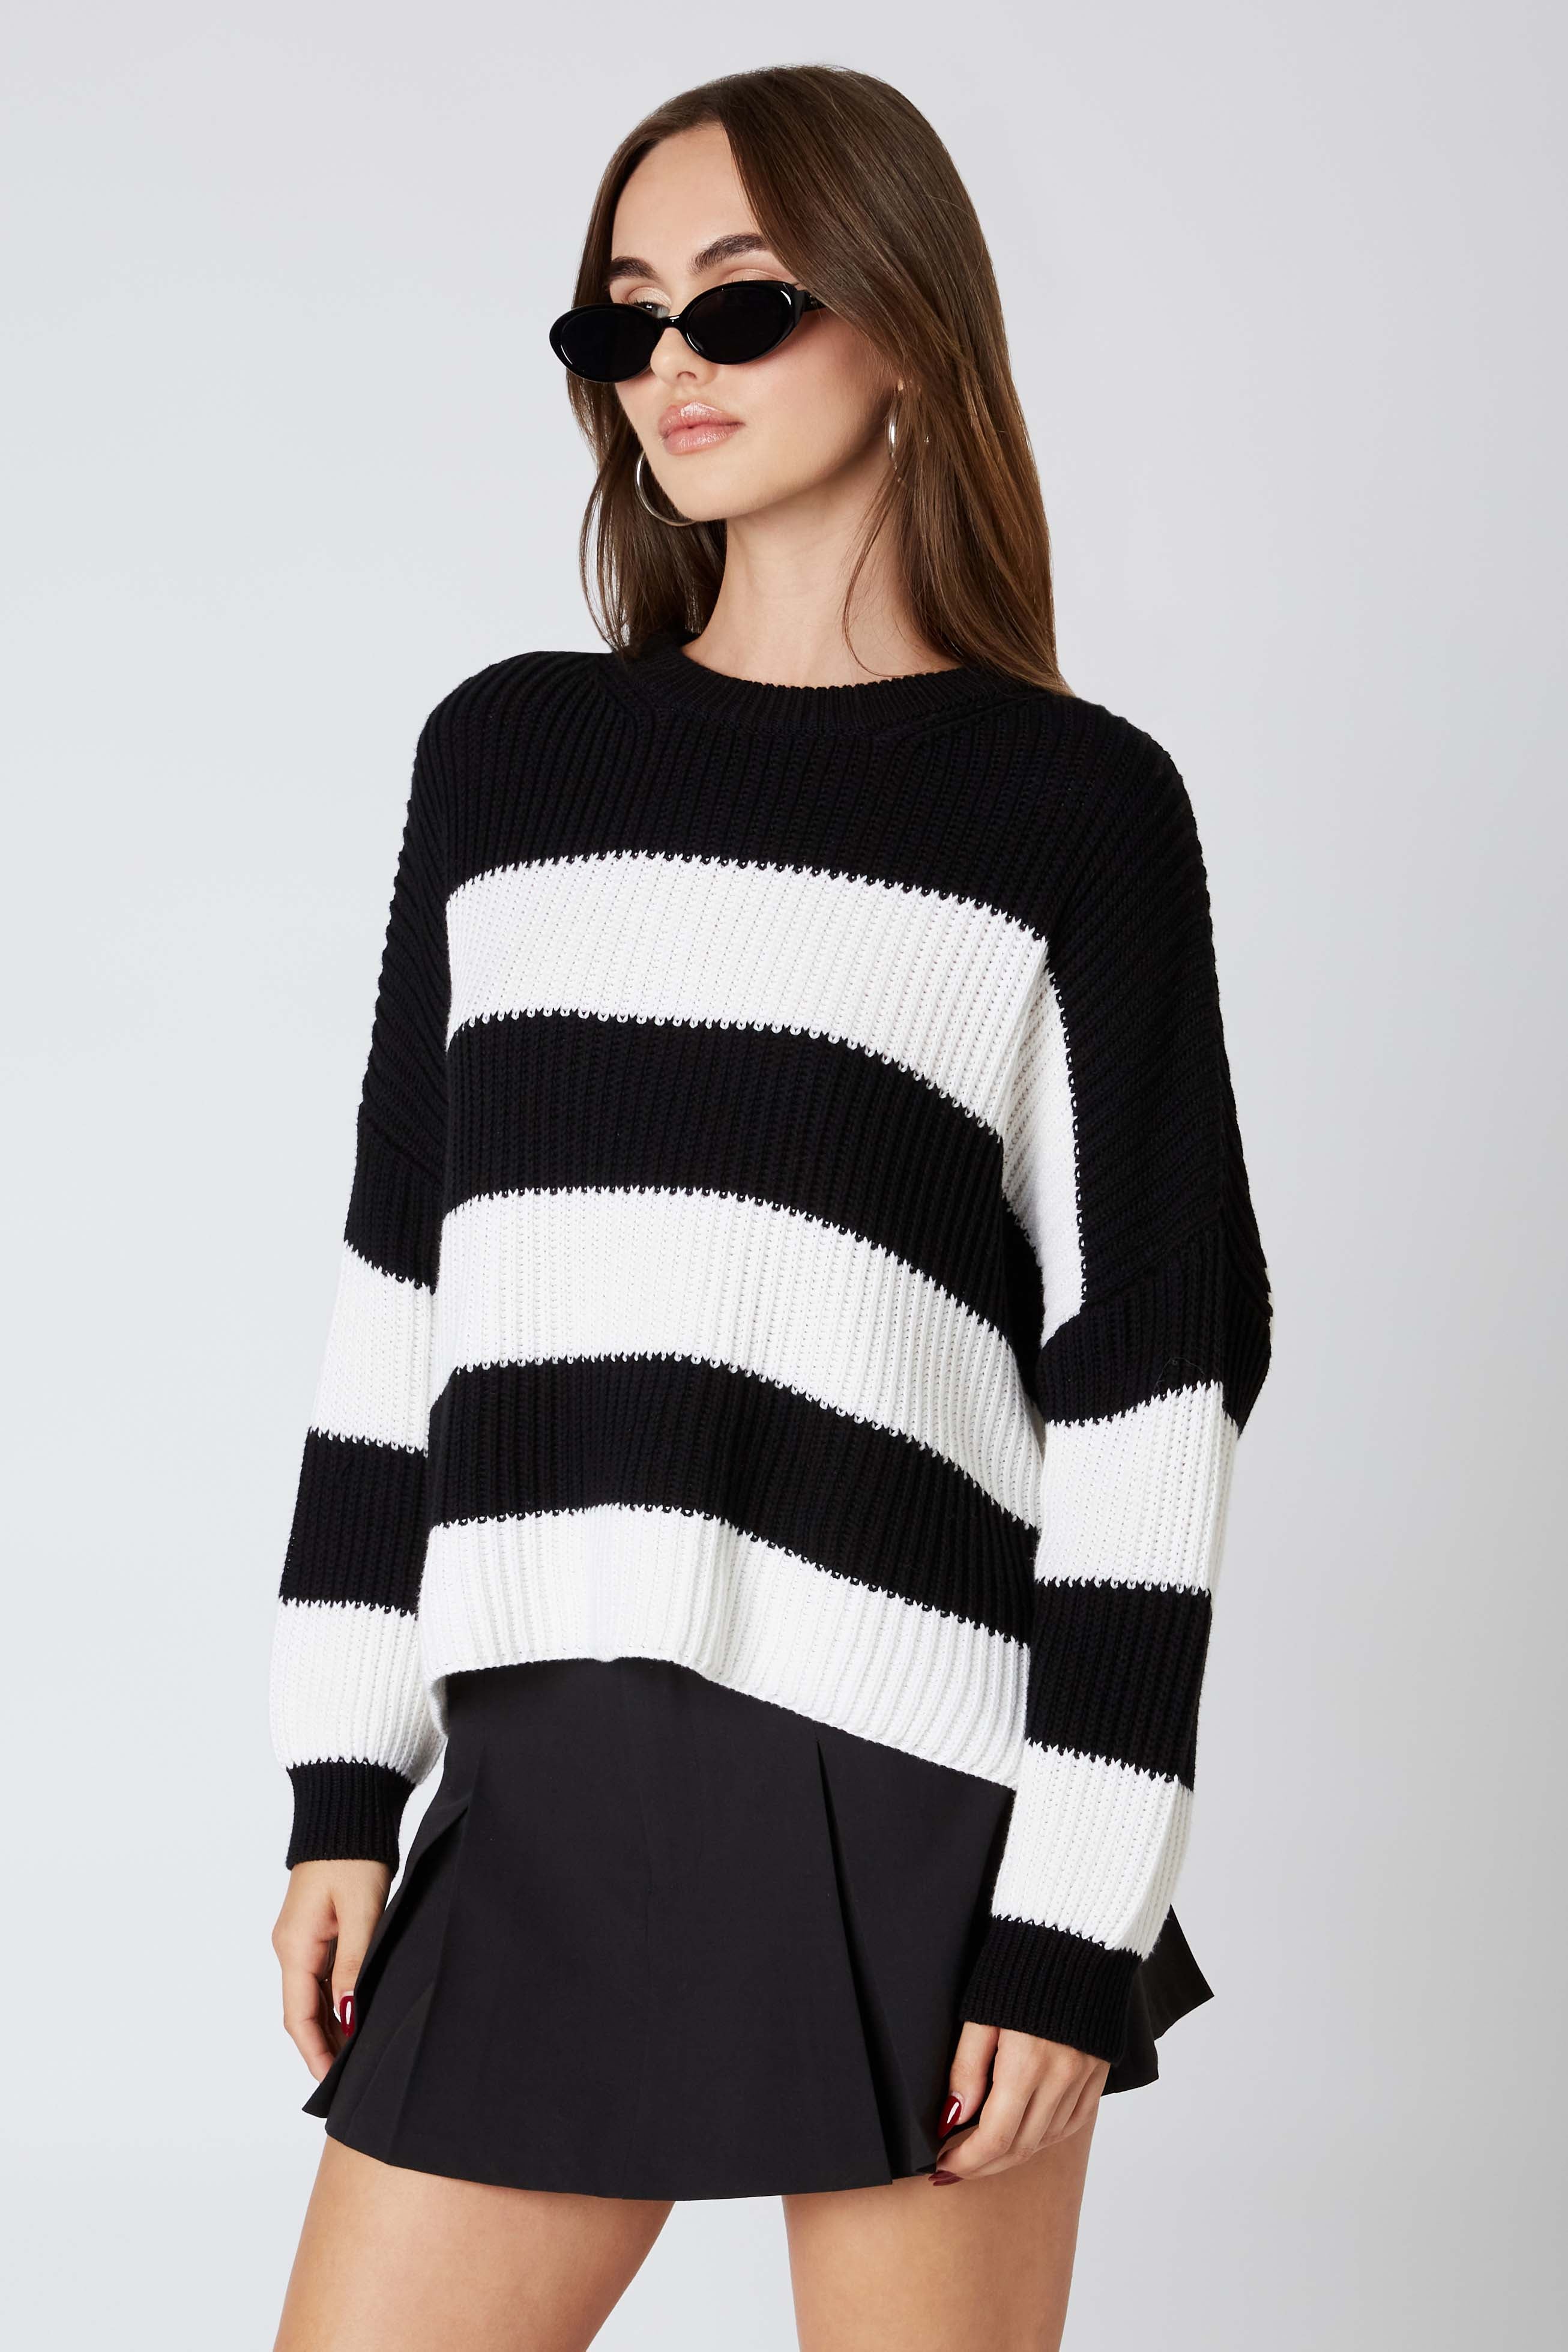 Rugby Oversized Sweater in Black White Side View